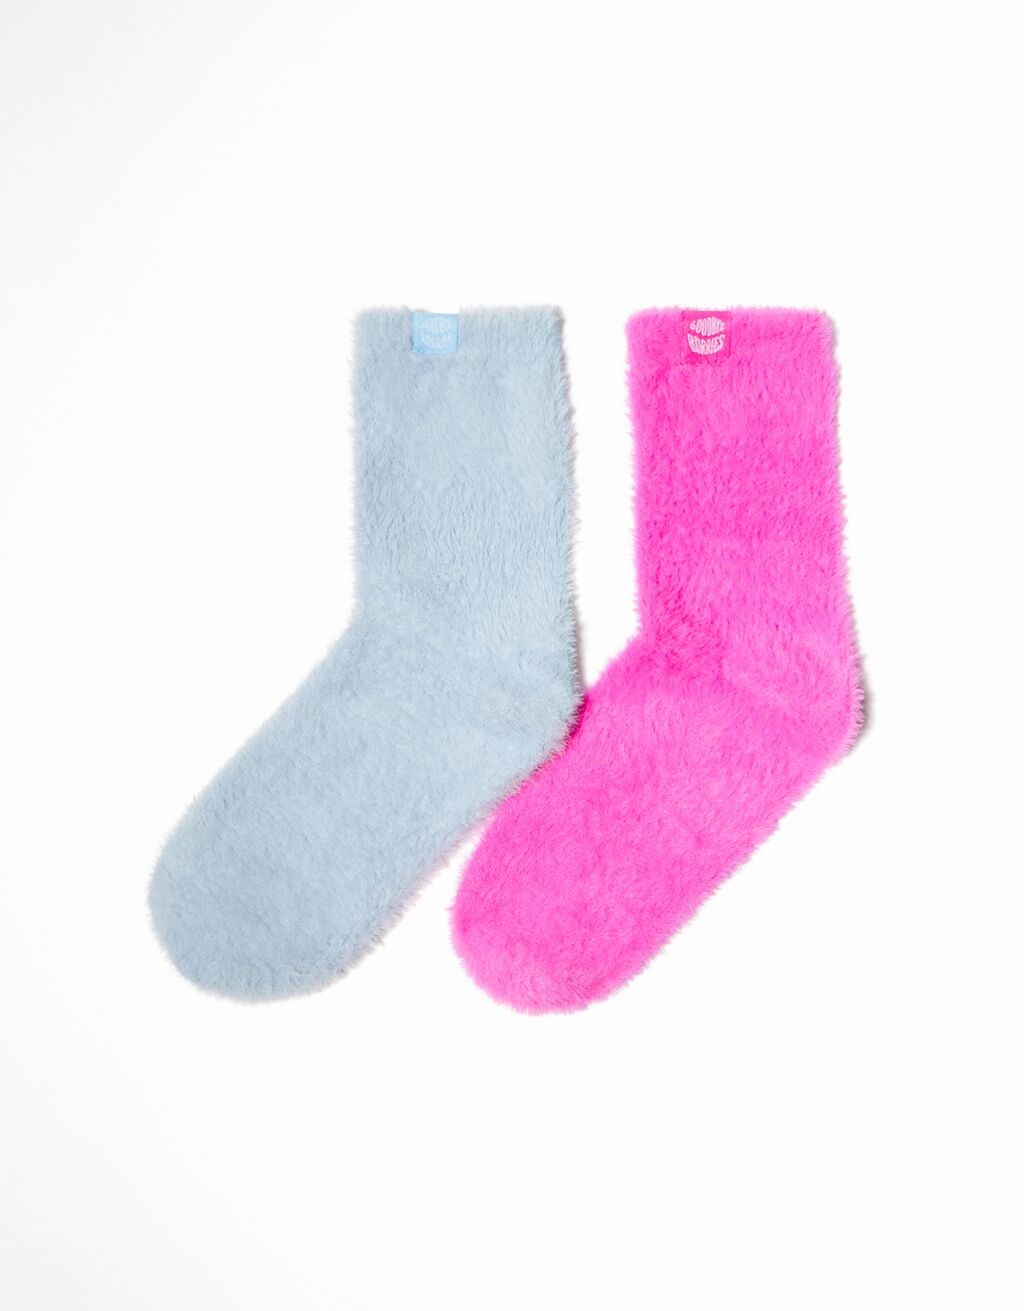 Pack of 2 pairs of textured socks